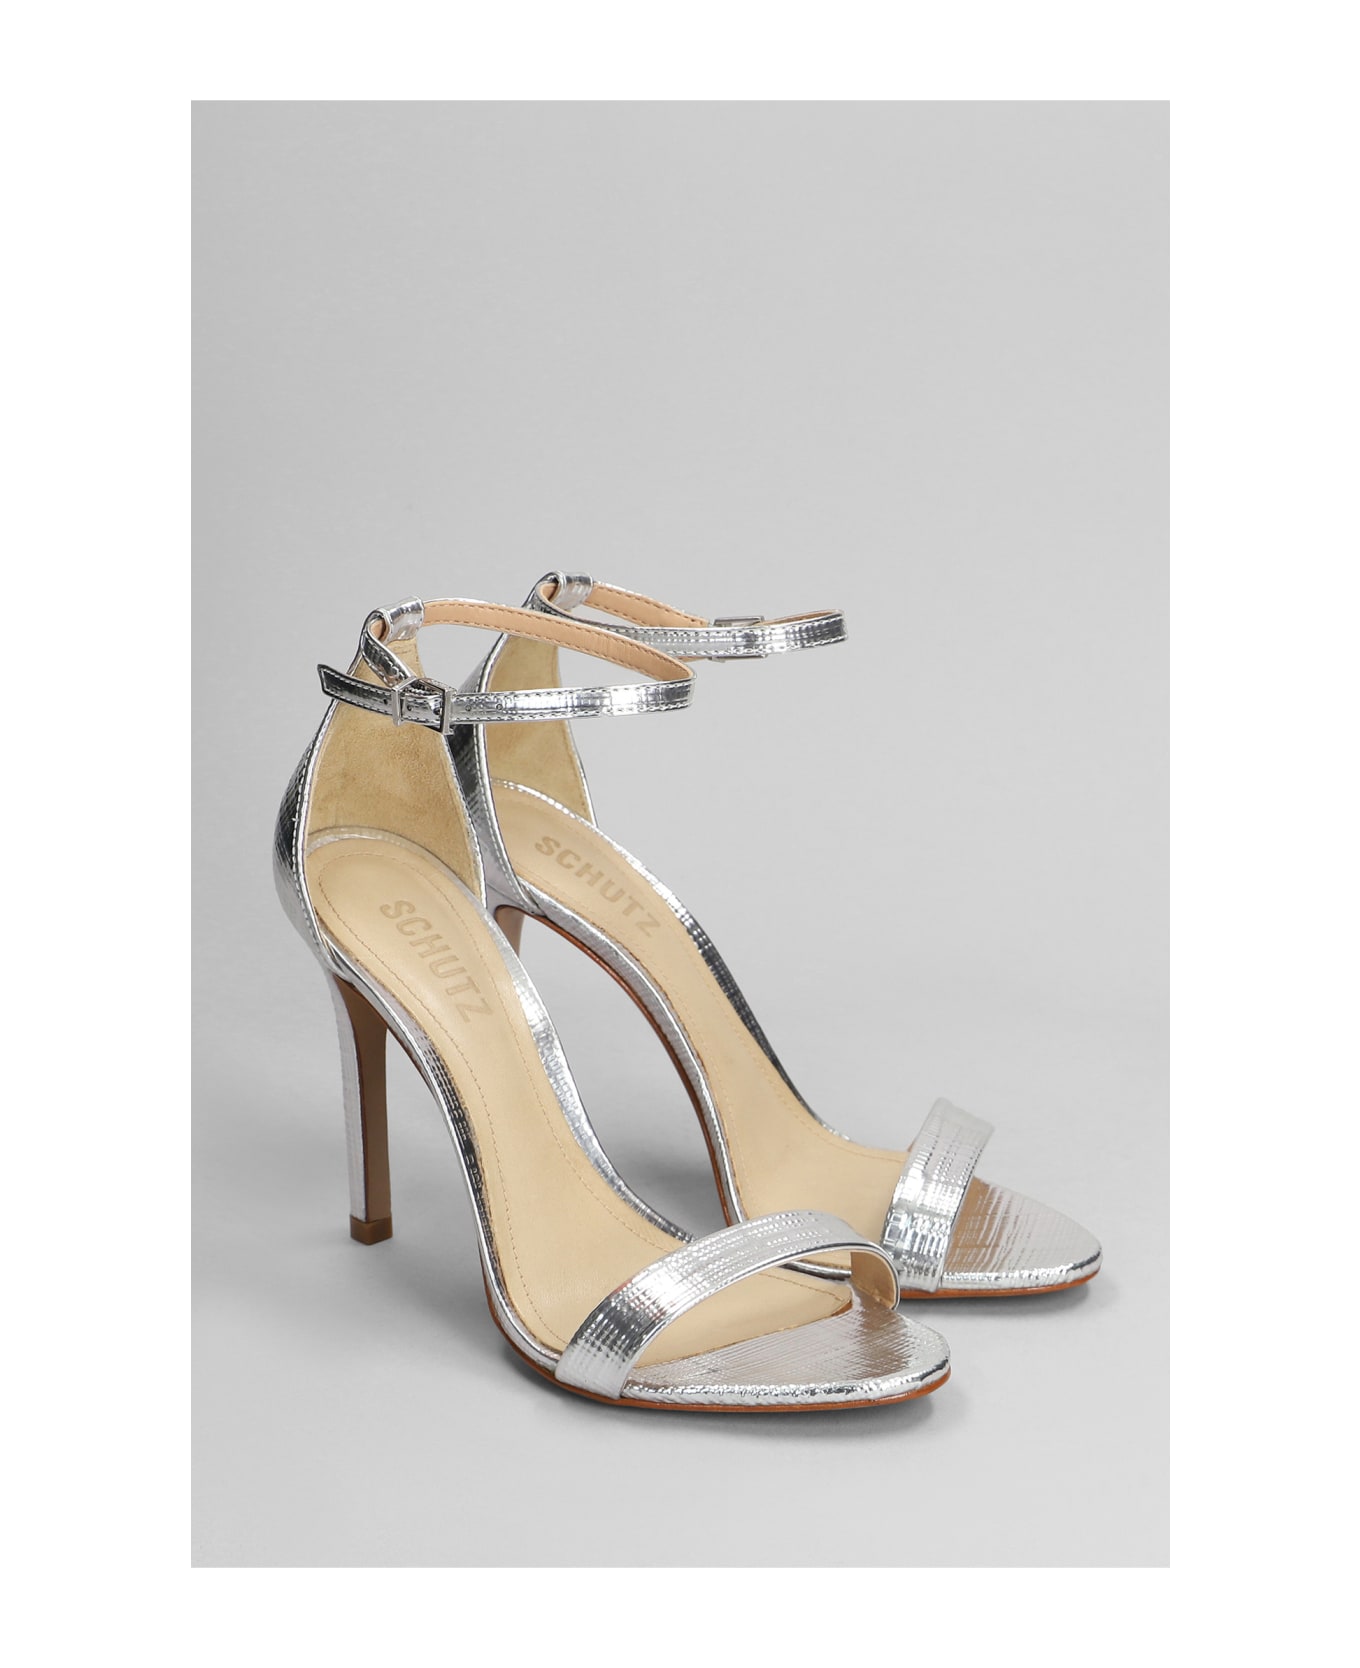 Schutz Sandals In Silver Leather - silver サンダル